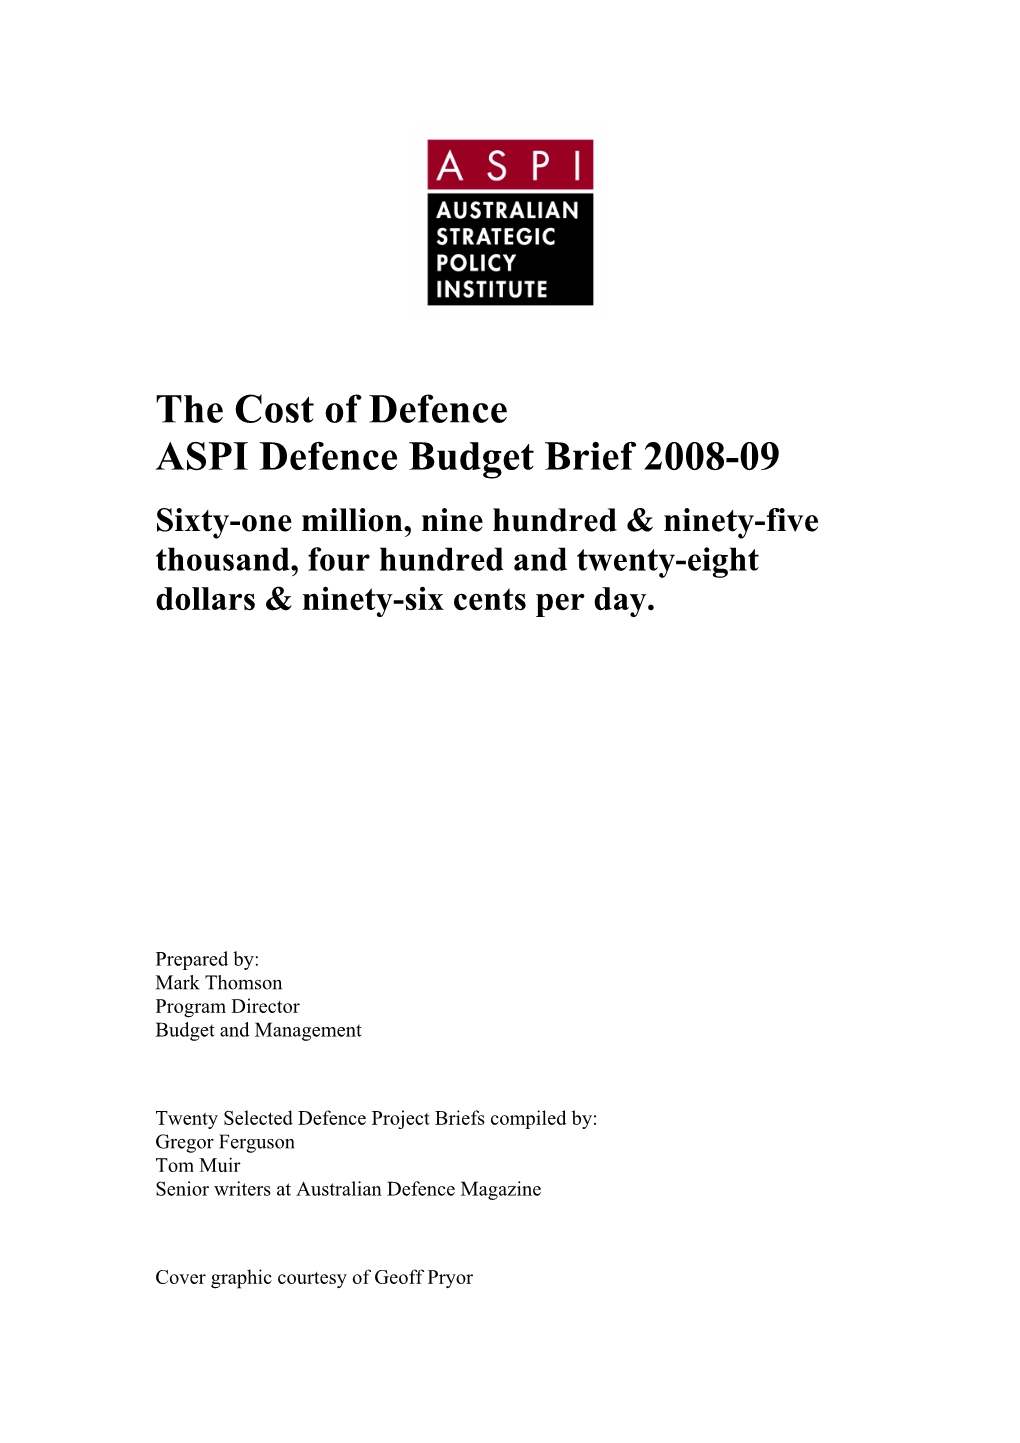 The Cost of Defence: ASPI Budget Brief 2008-09